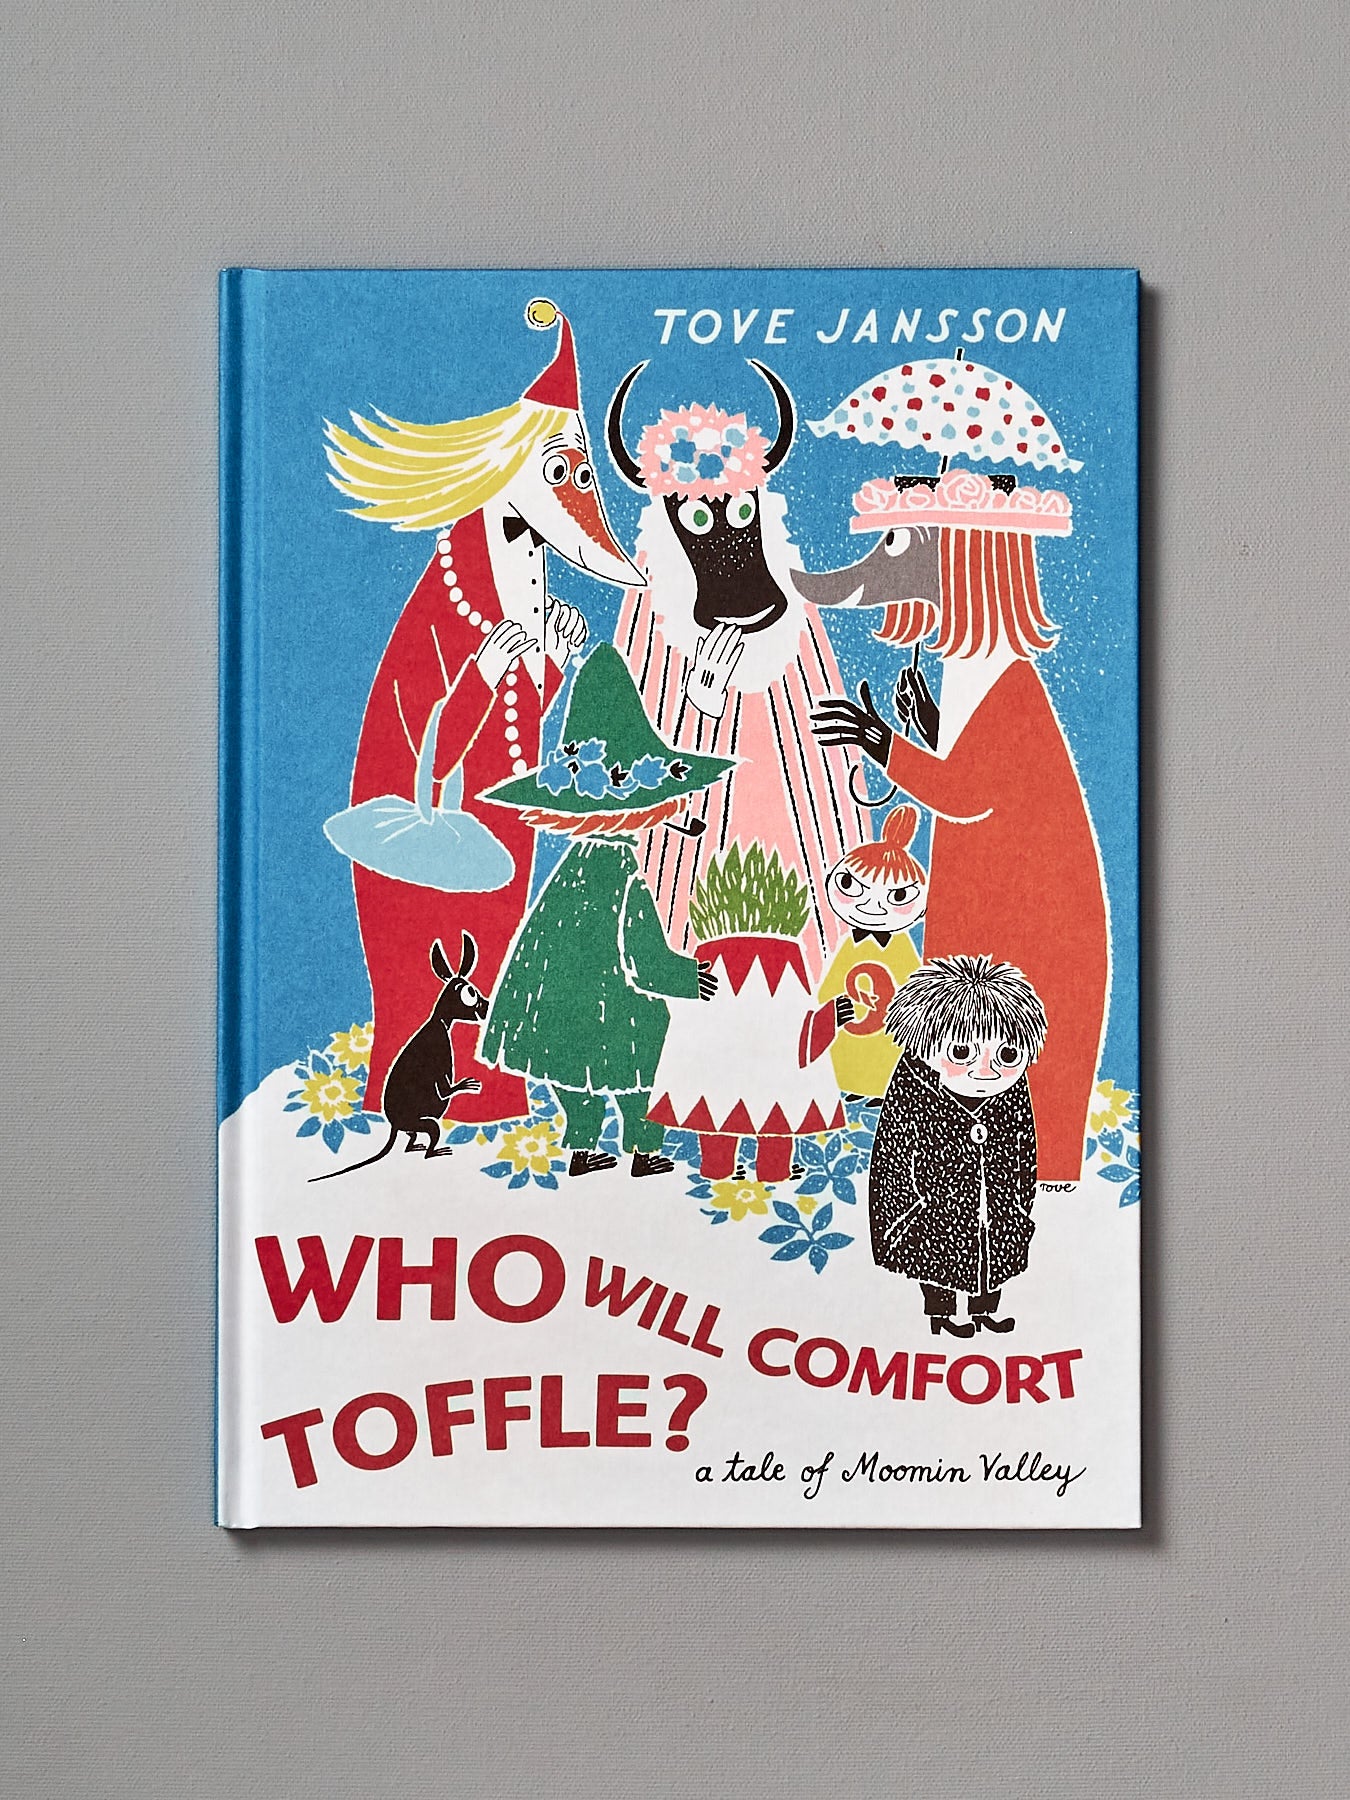 Who will comfort Who Will Comfort Toffle? by Tove Jansson?